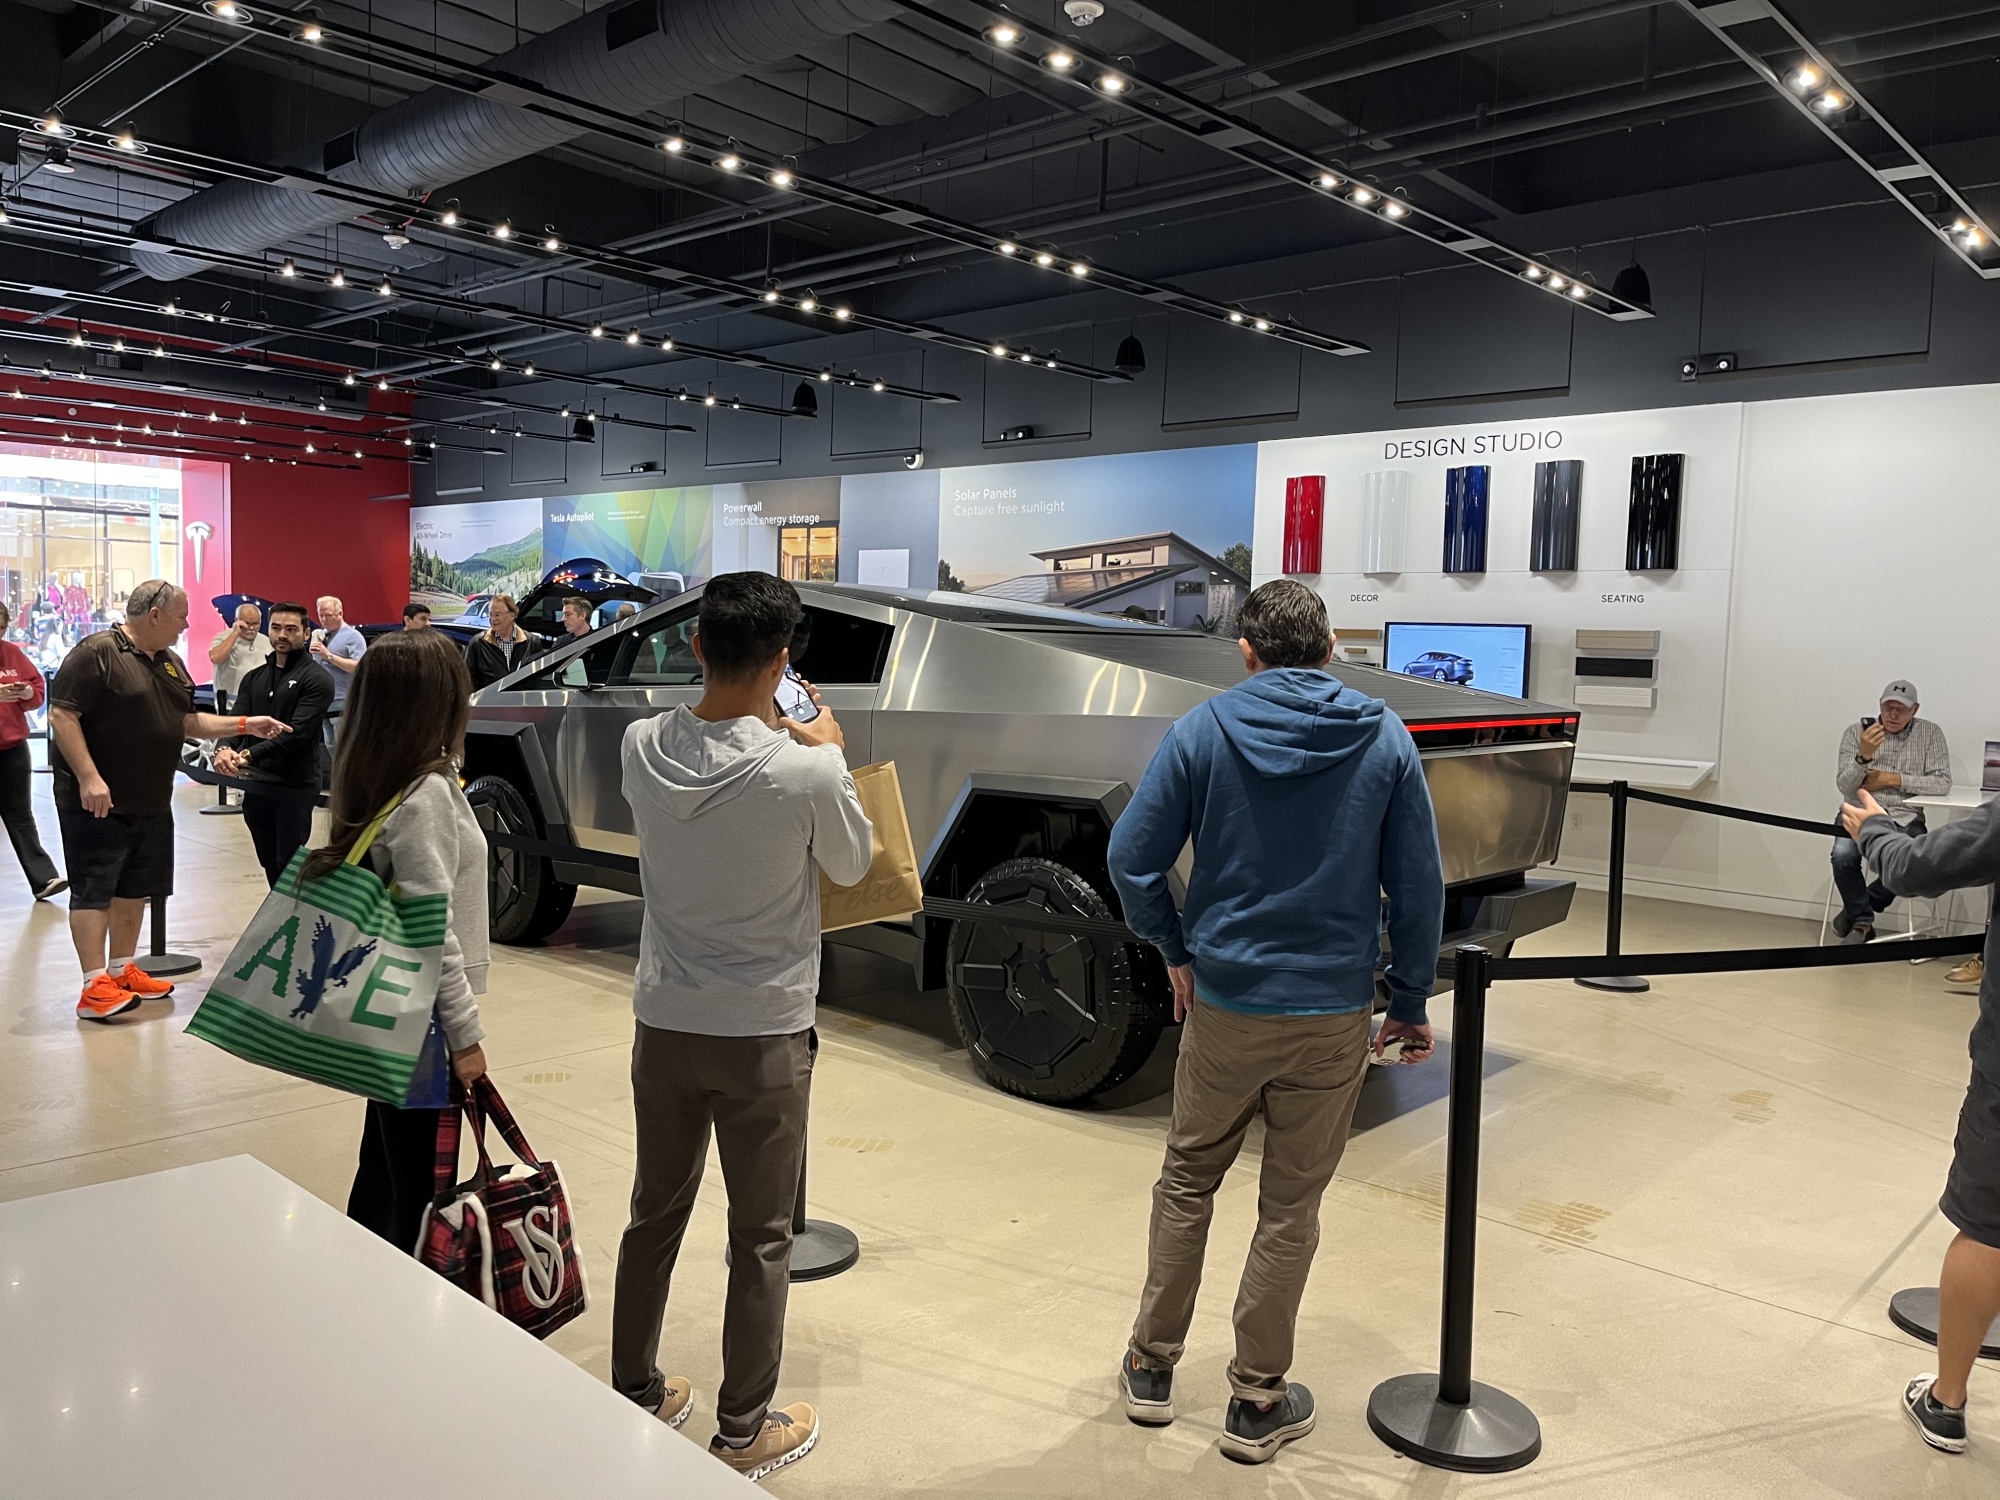 San Diego Tesla showroom now has a CyberTruck on display, and a